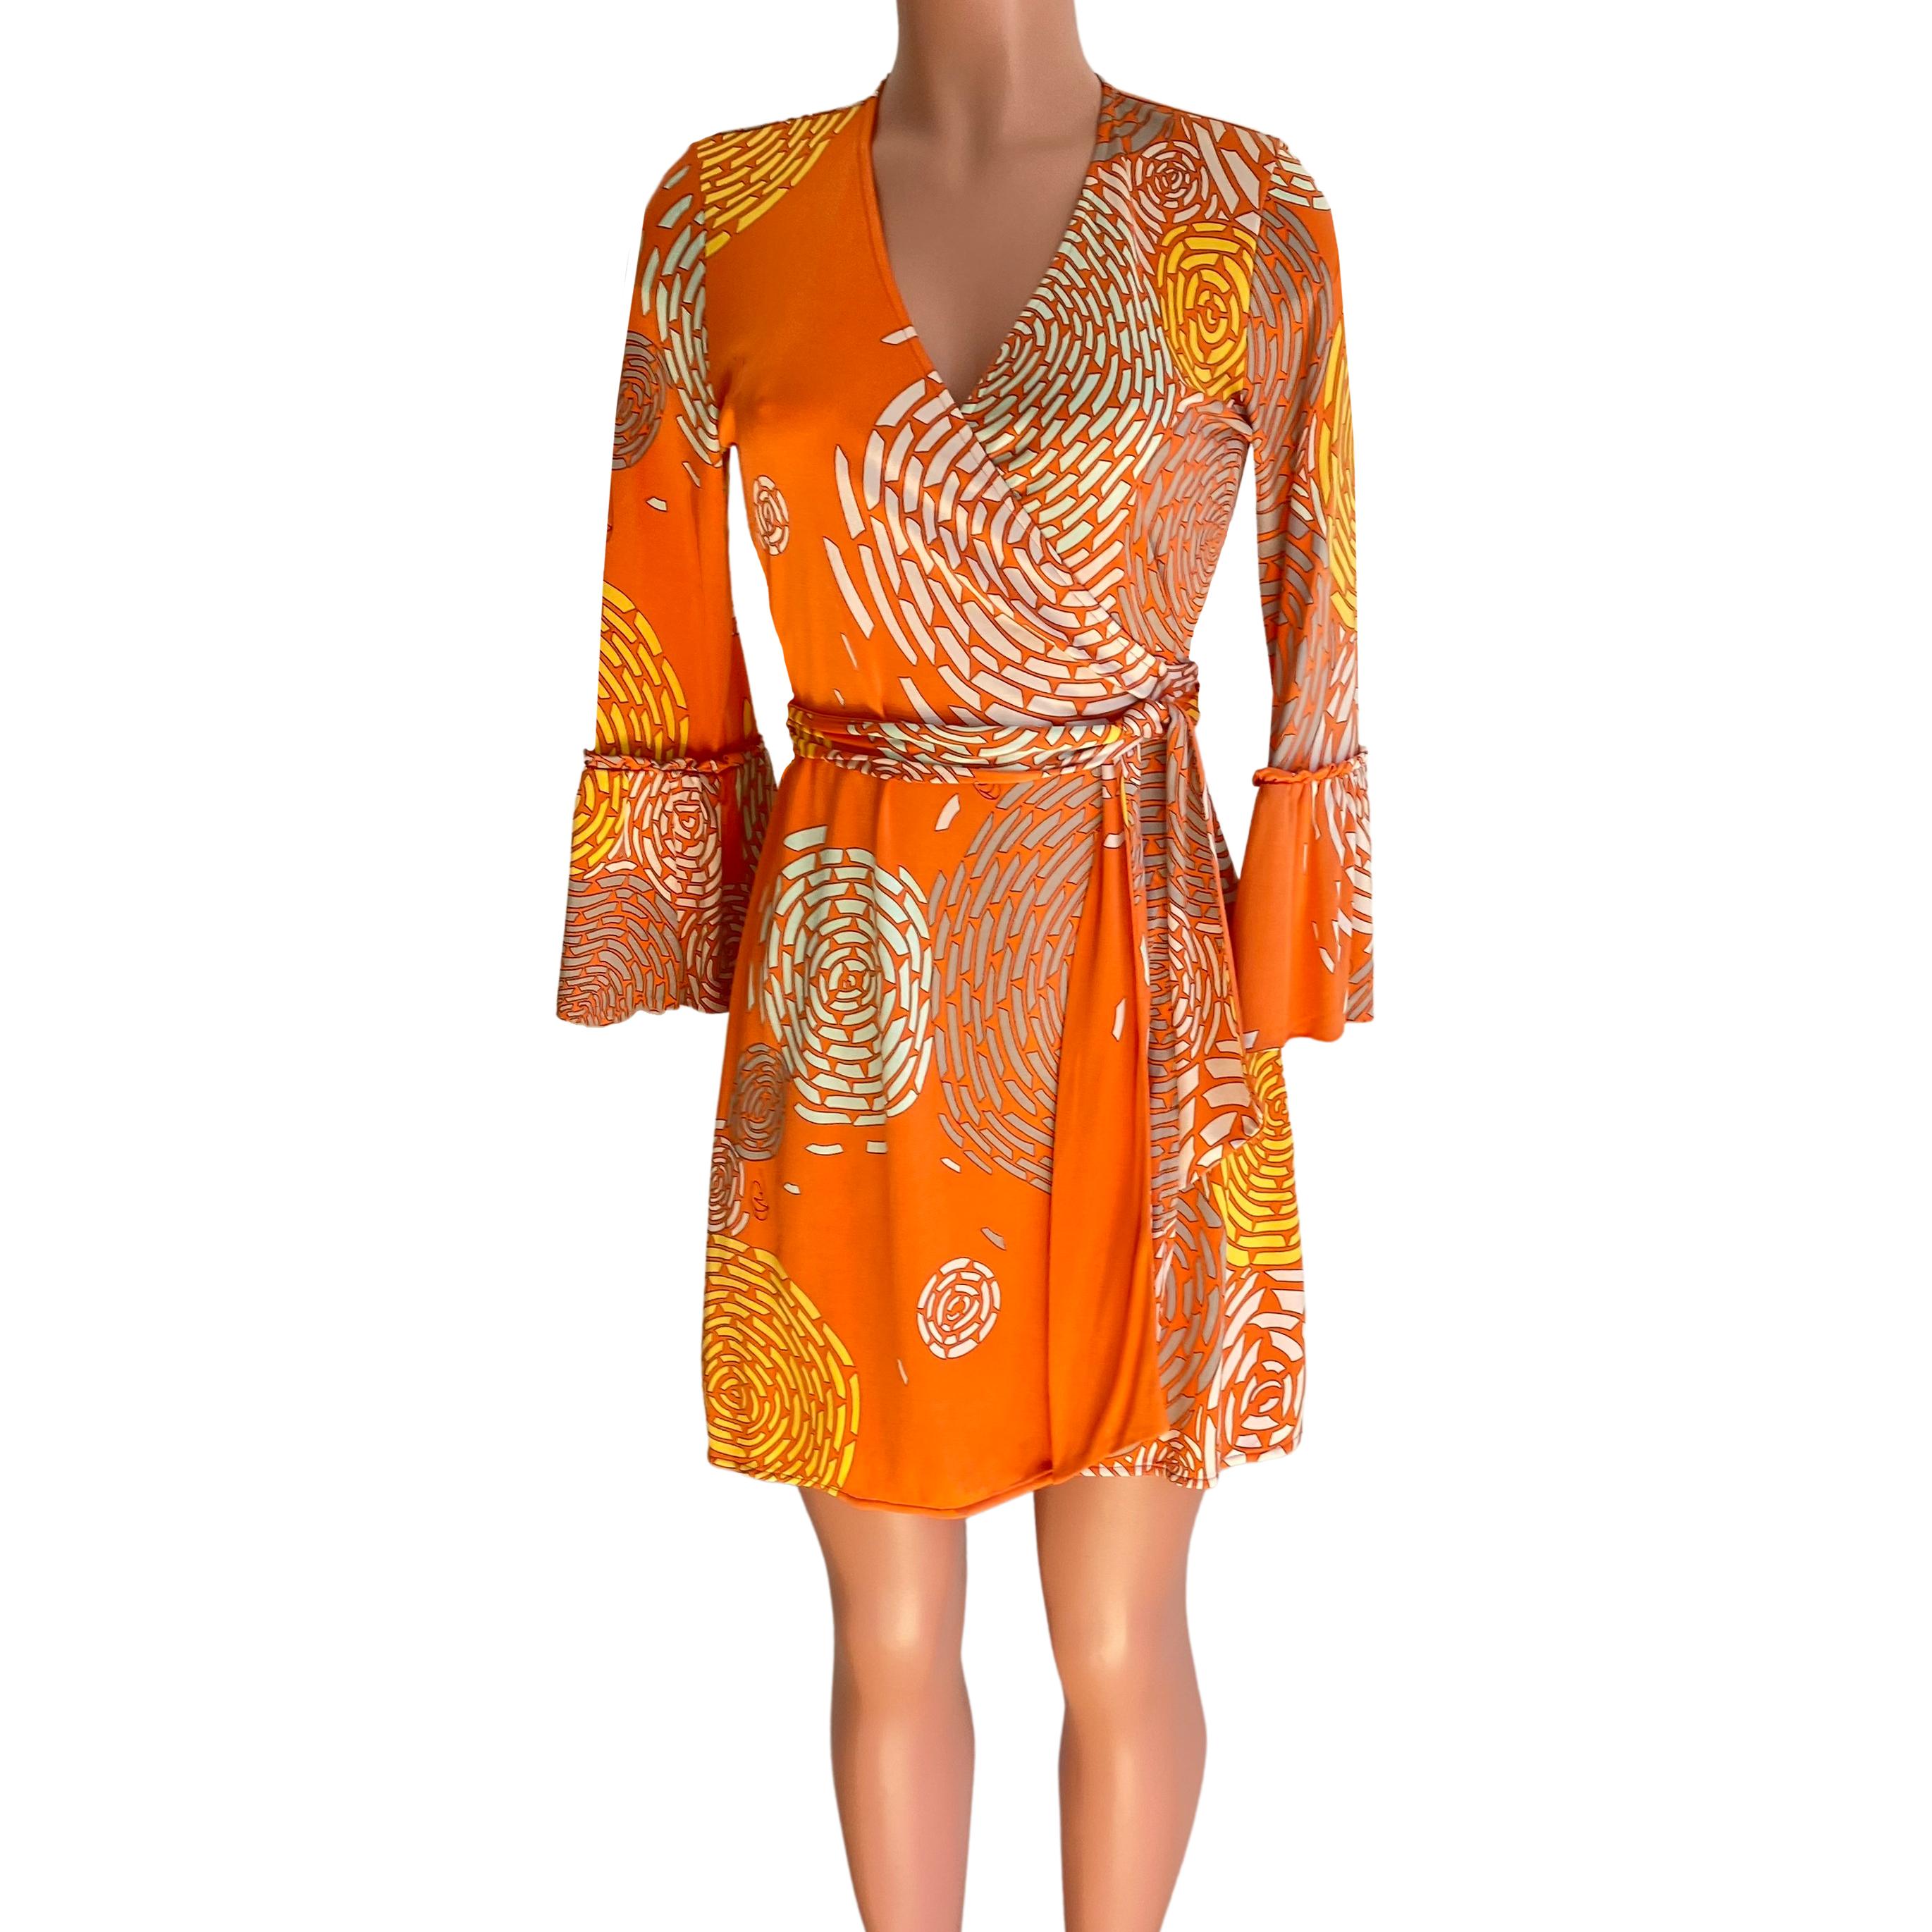 True wrap mini dress in flattering salmon coral orange print and statement sleeves.
In Flora's original abstract chrysanthemum print on rich coral orange background.
Flattering bell sleeves with braided details.
True wrap. Ties are long enough to be